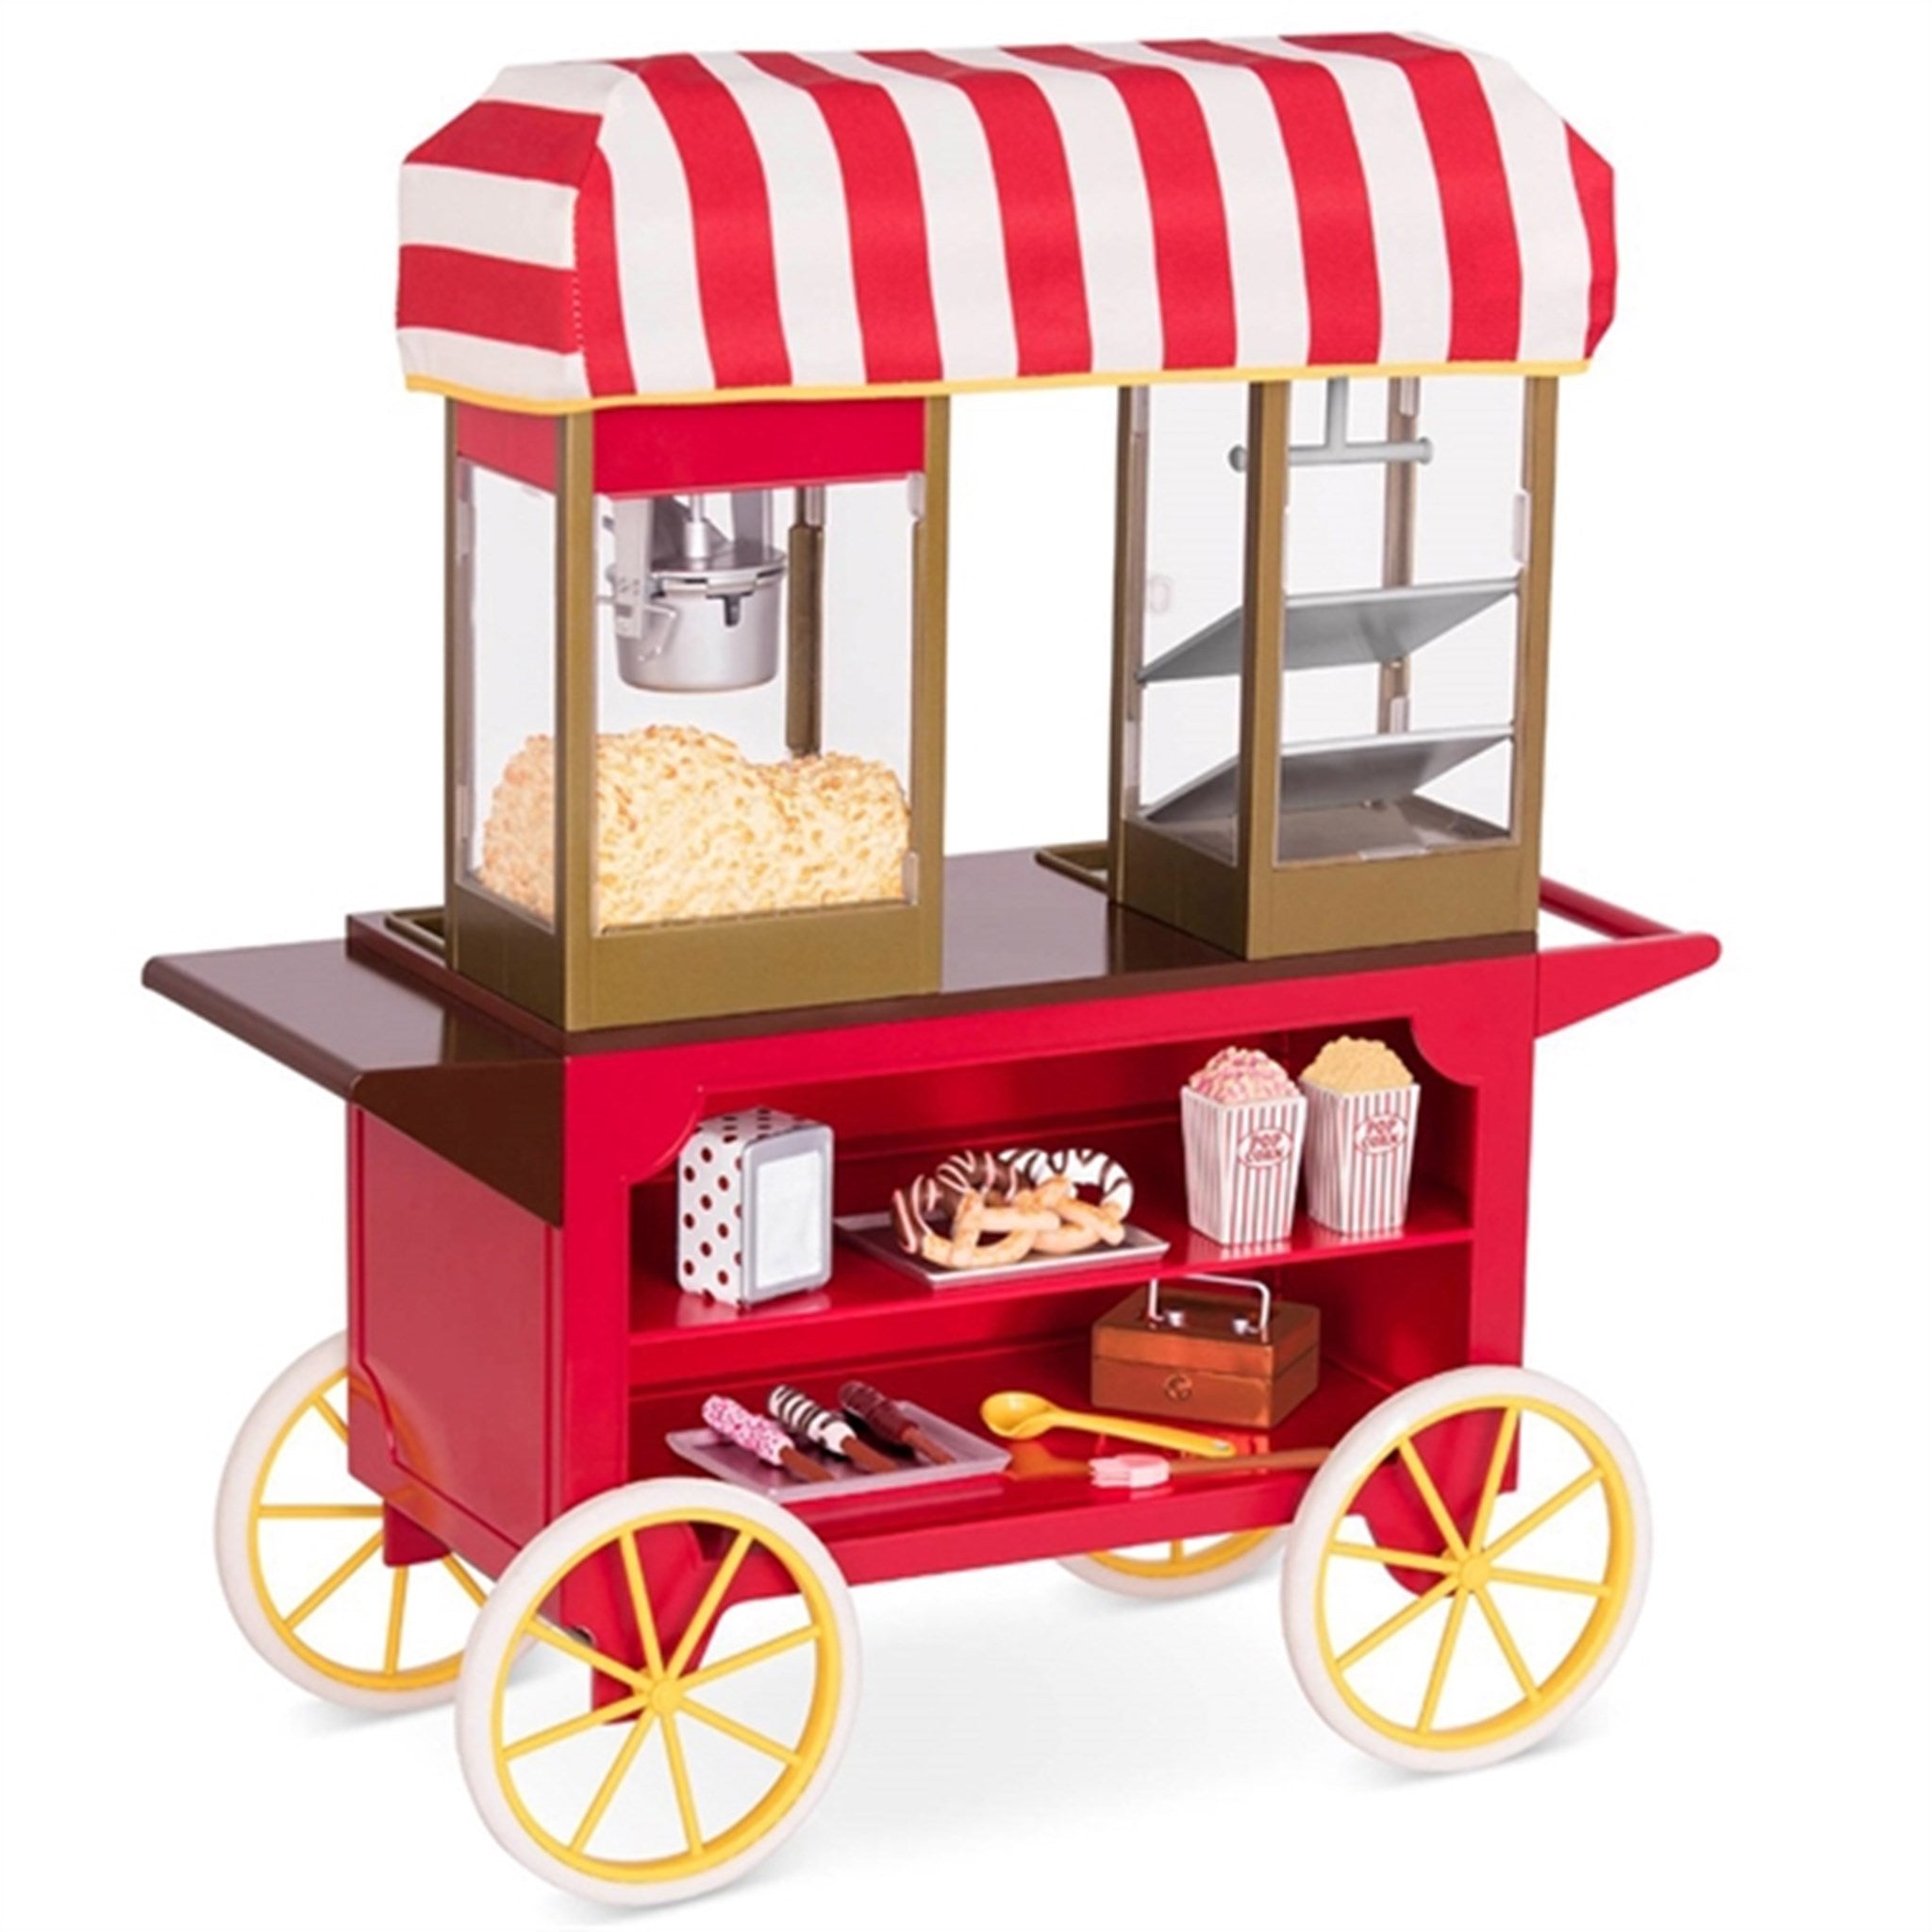 Our Generation Pastry and Popcorn Truck